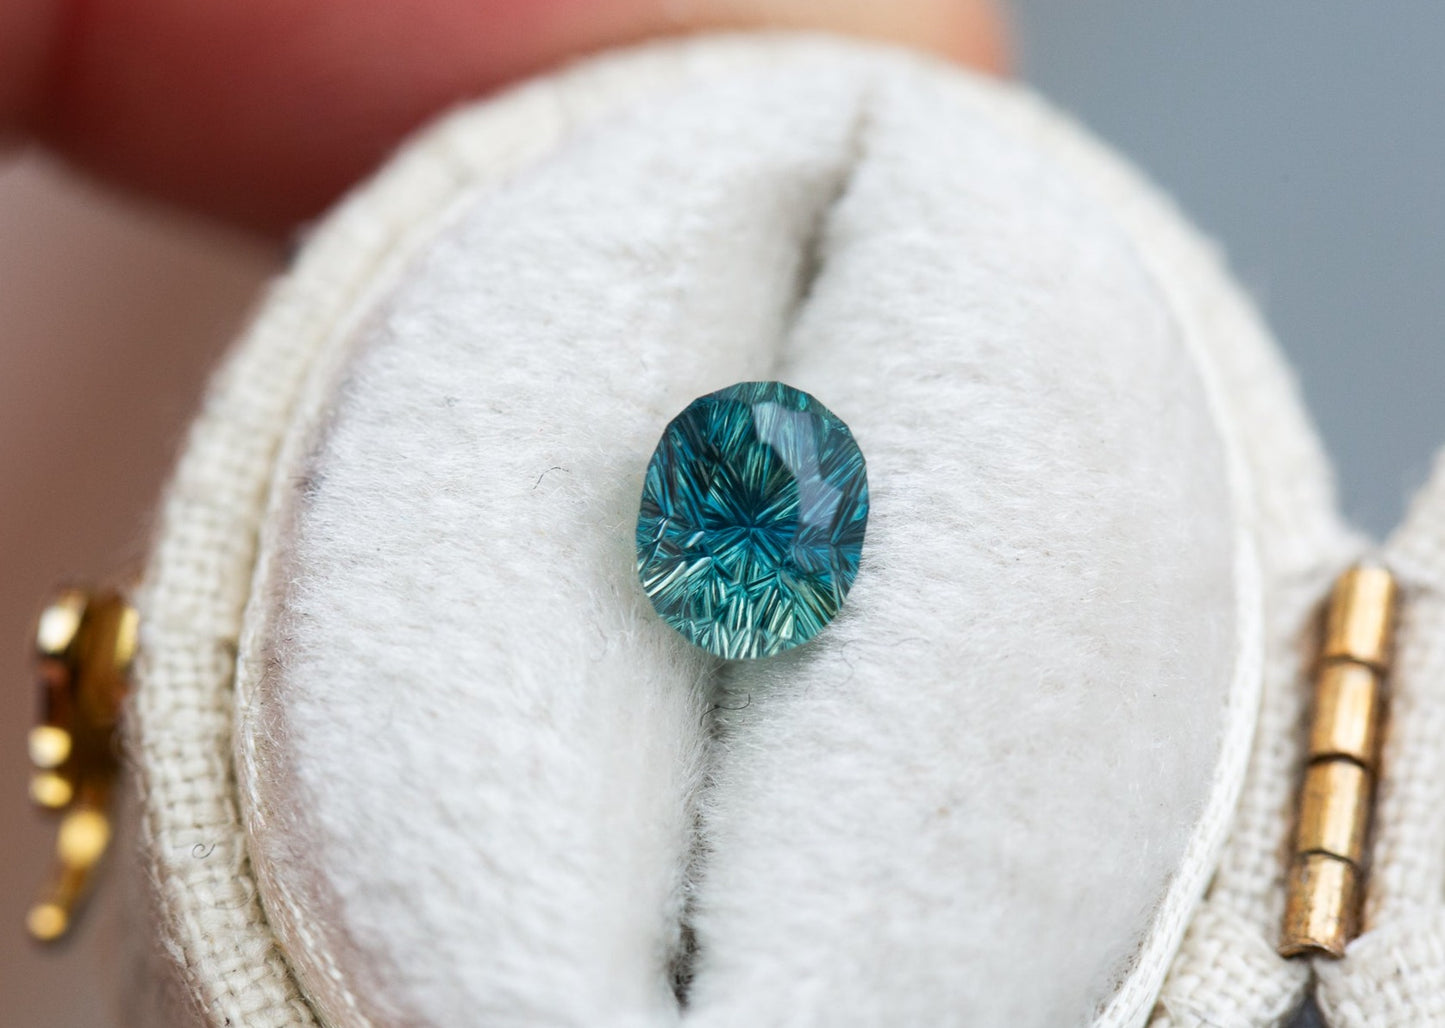 Load image into Gallery viewer, 1.3ct teal concave cut sapphire by John Dyer
